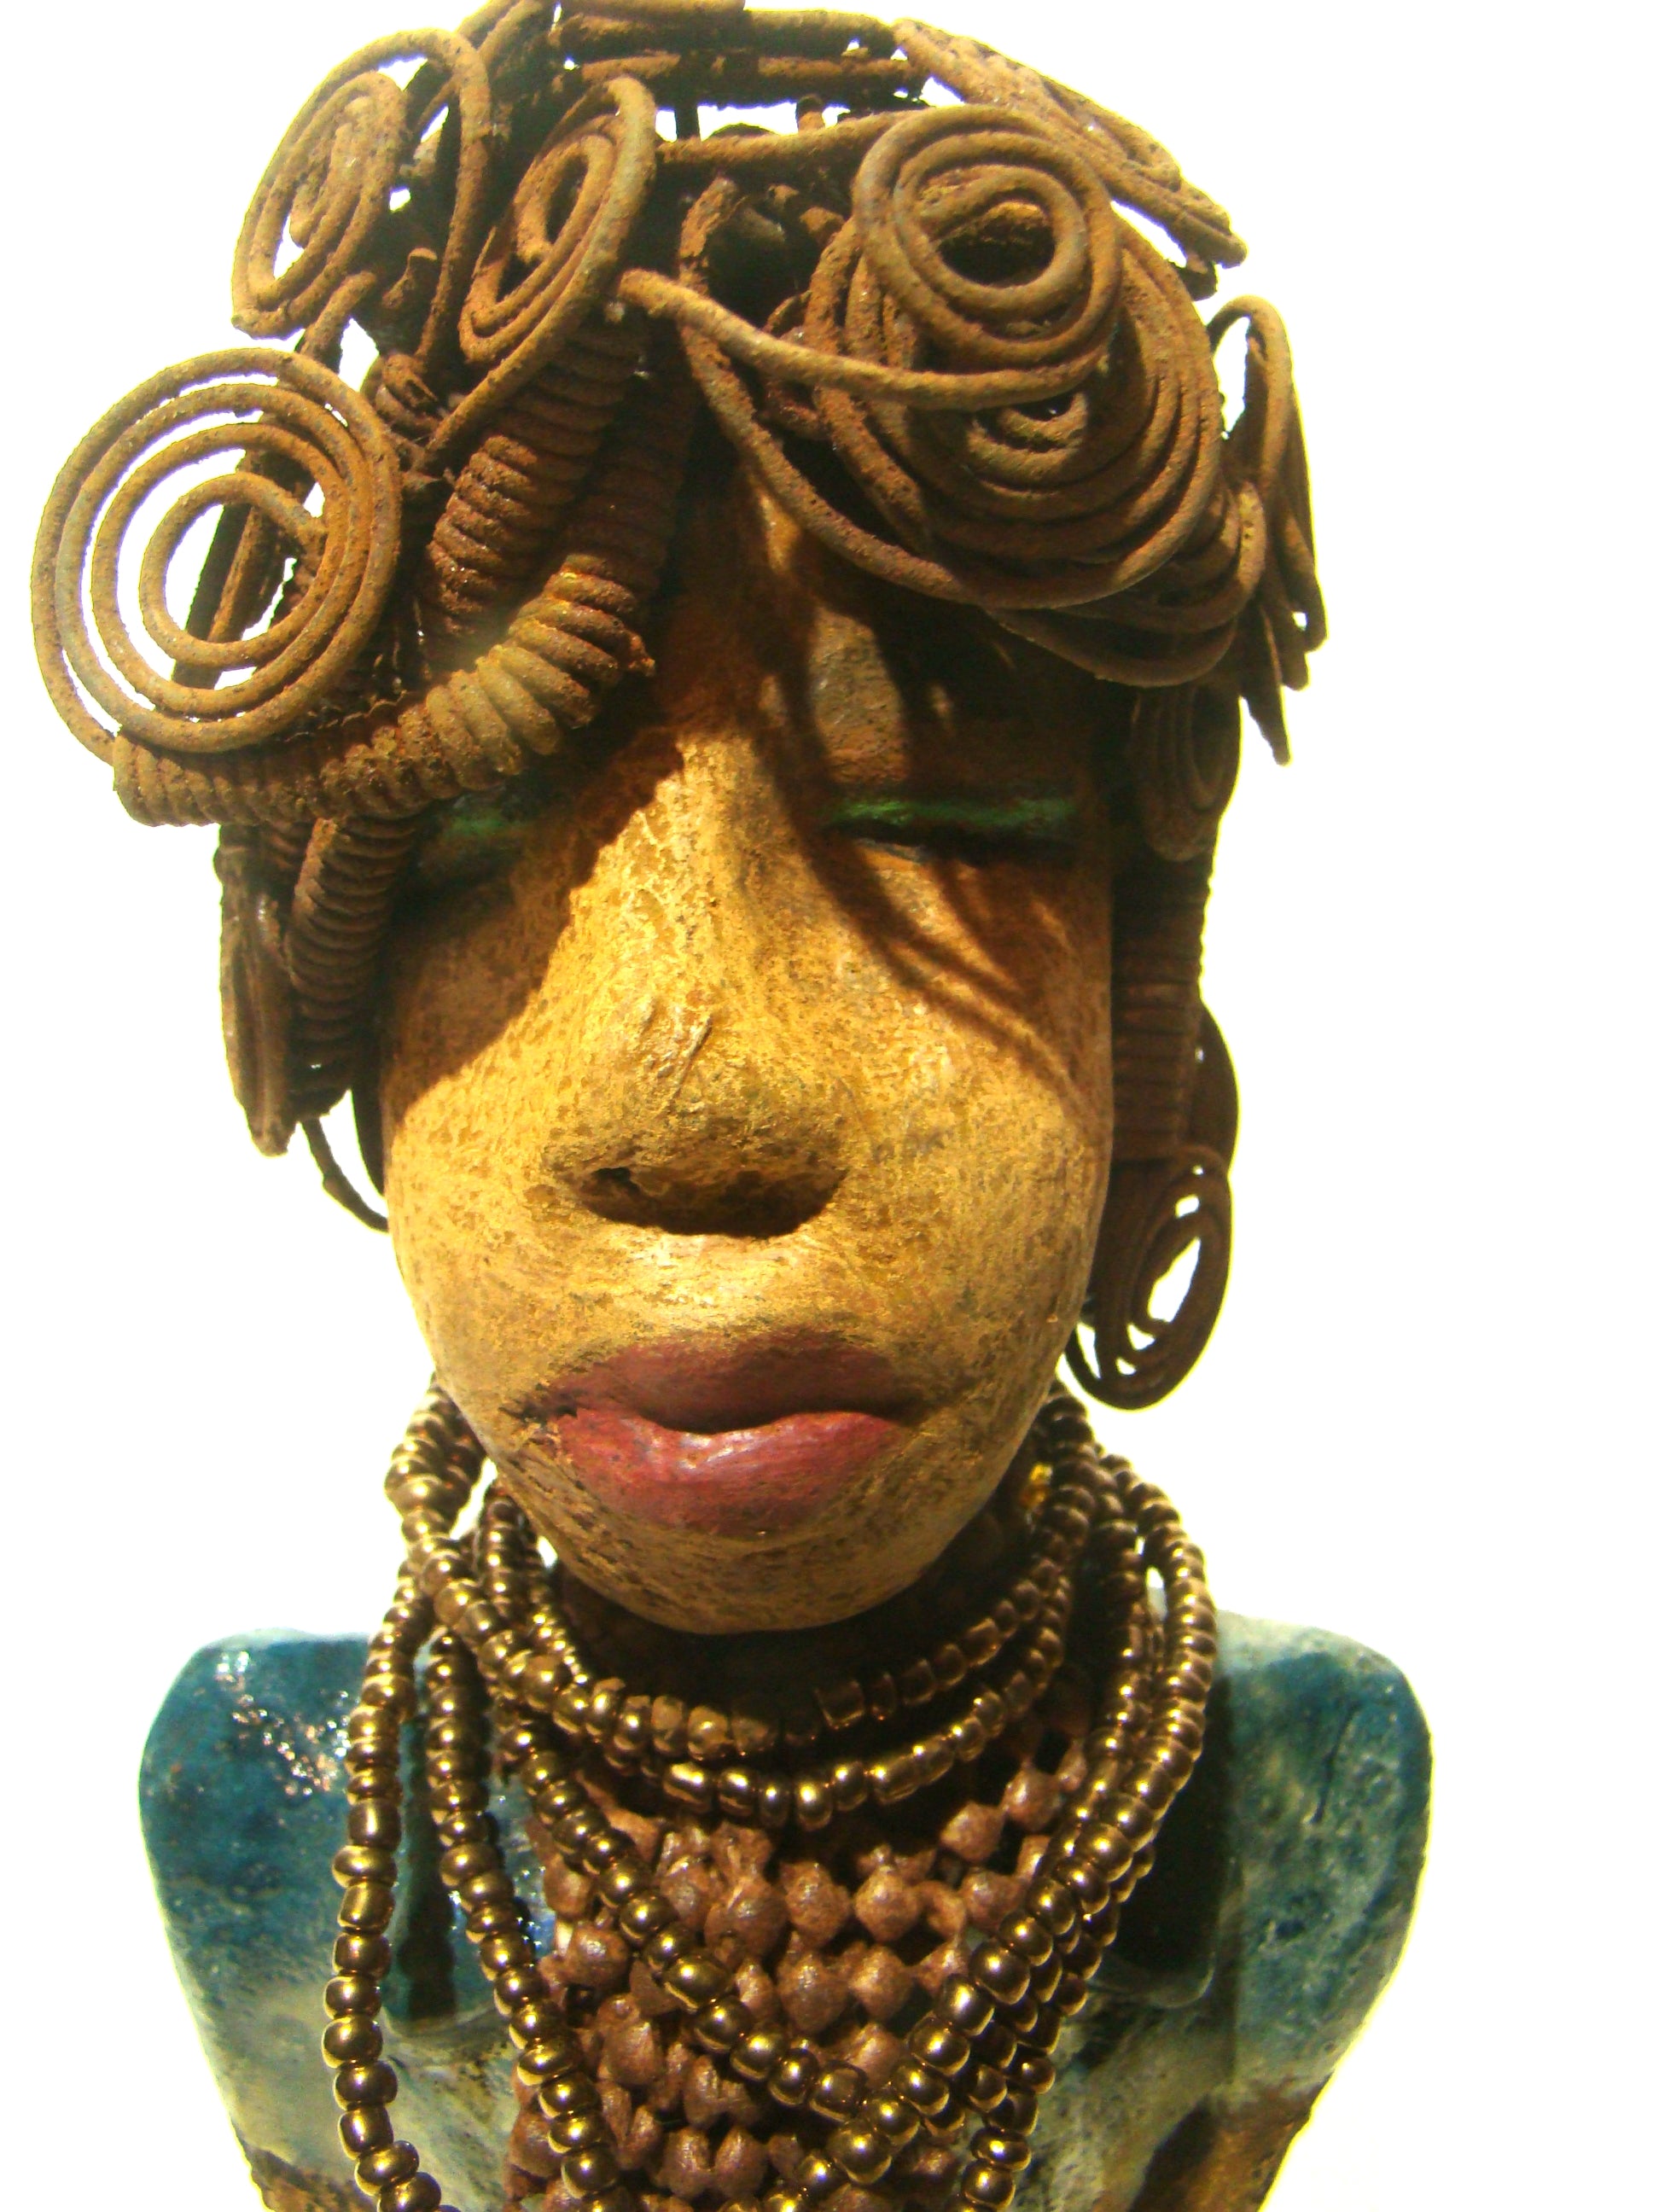      Sherri stands 13' x 4" x 2.5" and weighs 3.05 lbs.     She has over 25 feet of wire curls and coils.     Sherri has a sweet honey brown complexion.     Her dress is a metallic multi colored green with an amber beaded necklace and scarf.     Sherri has the familiar long loving arms at her side.